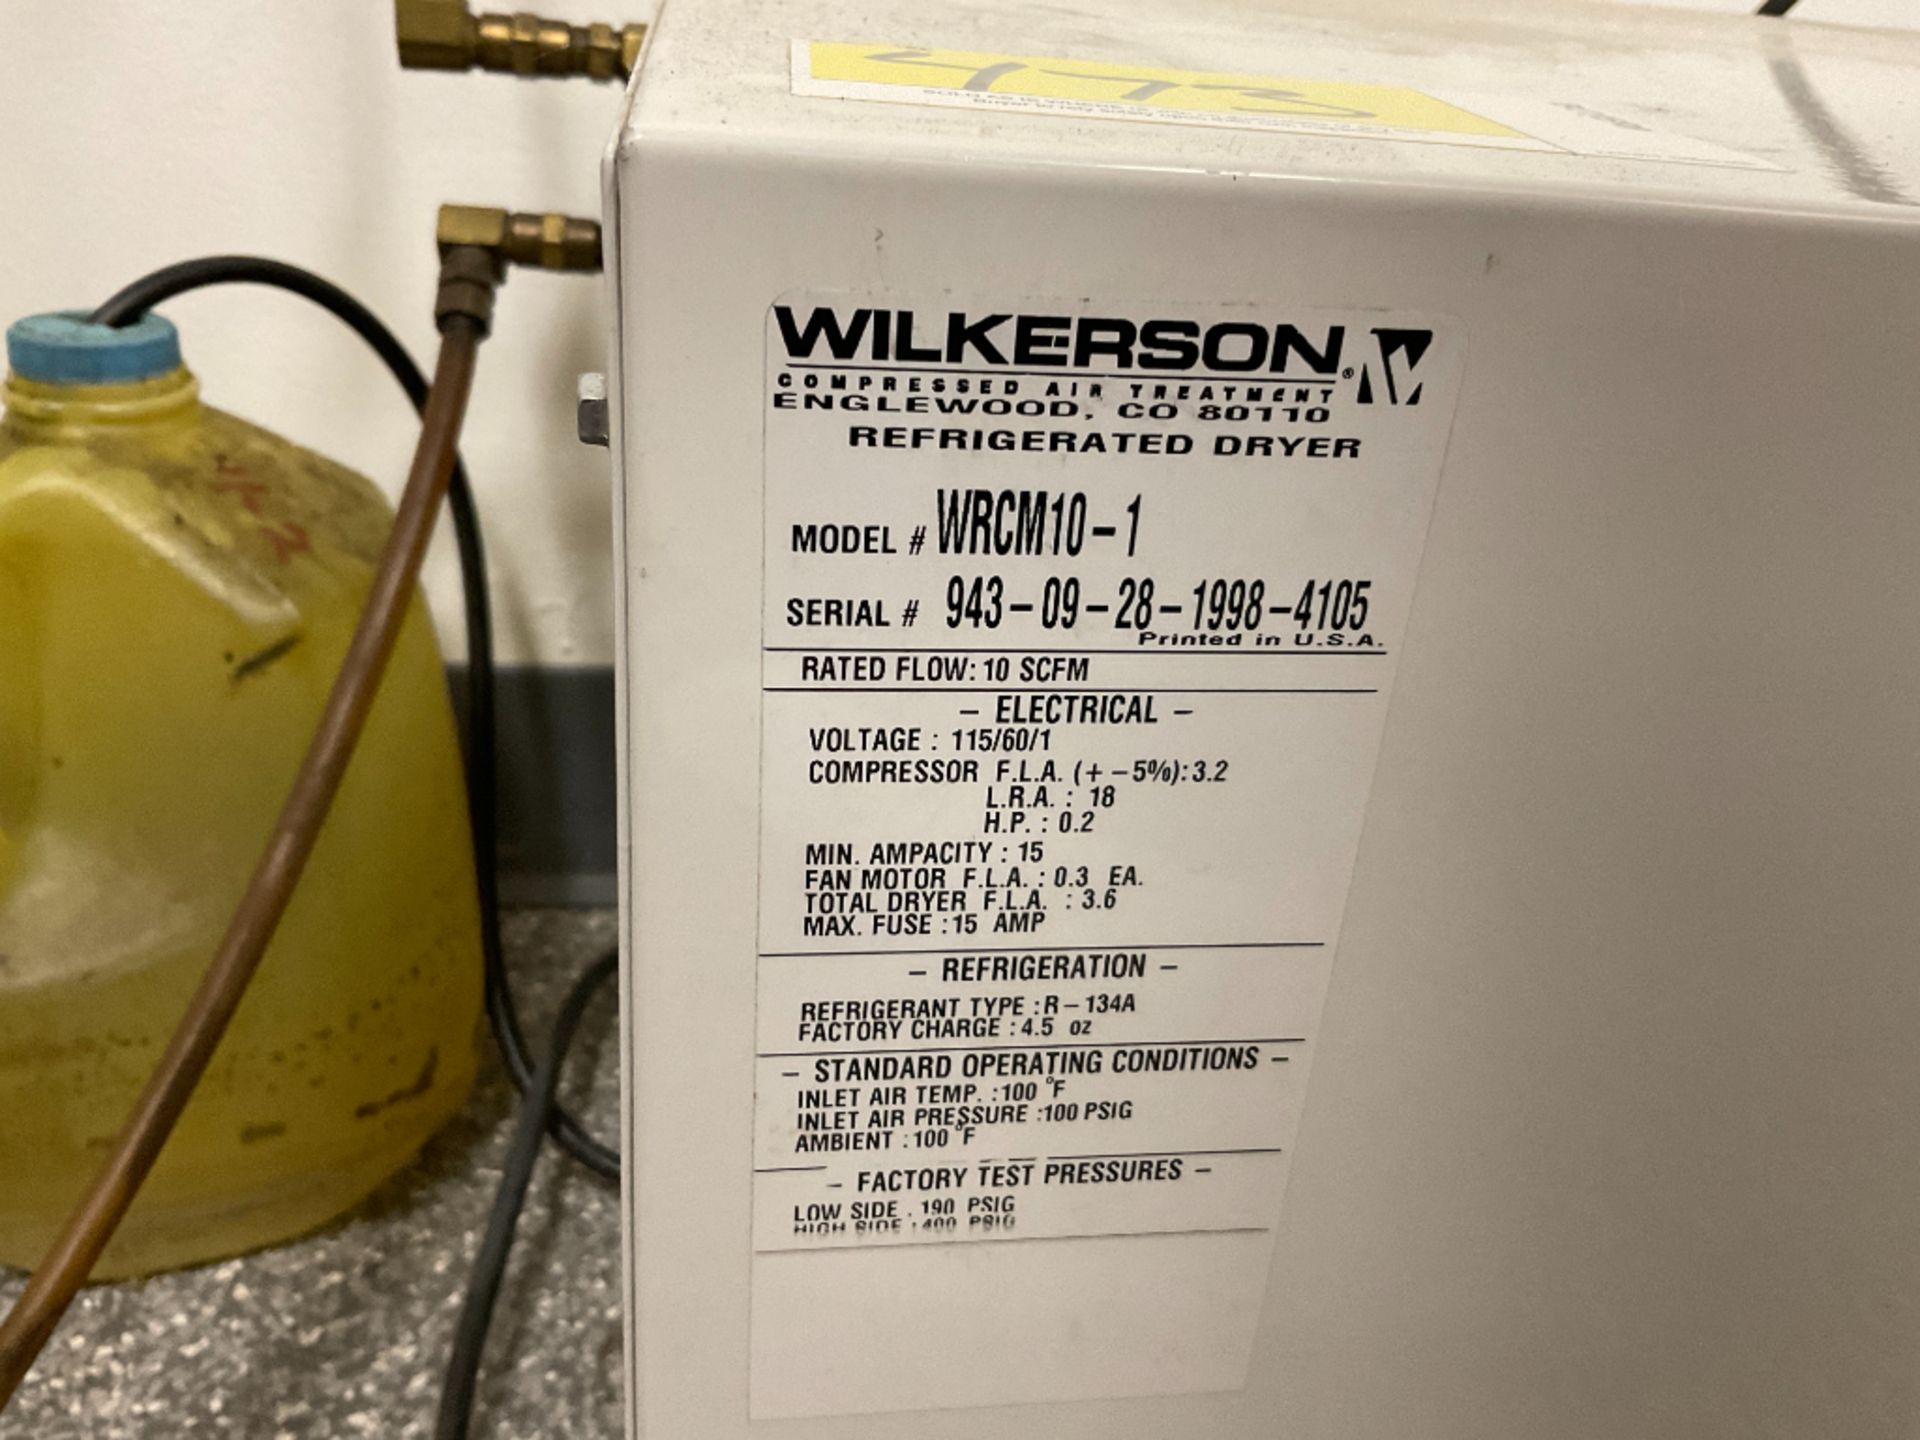 Wilkinson Refrigerated Dryer - Image 2 of 7